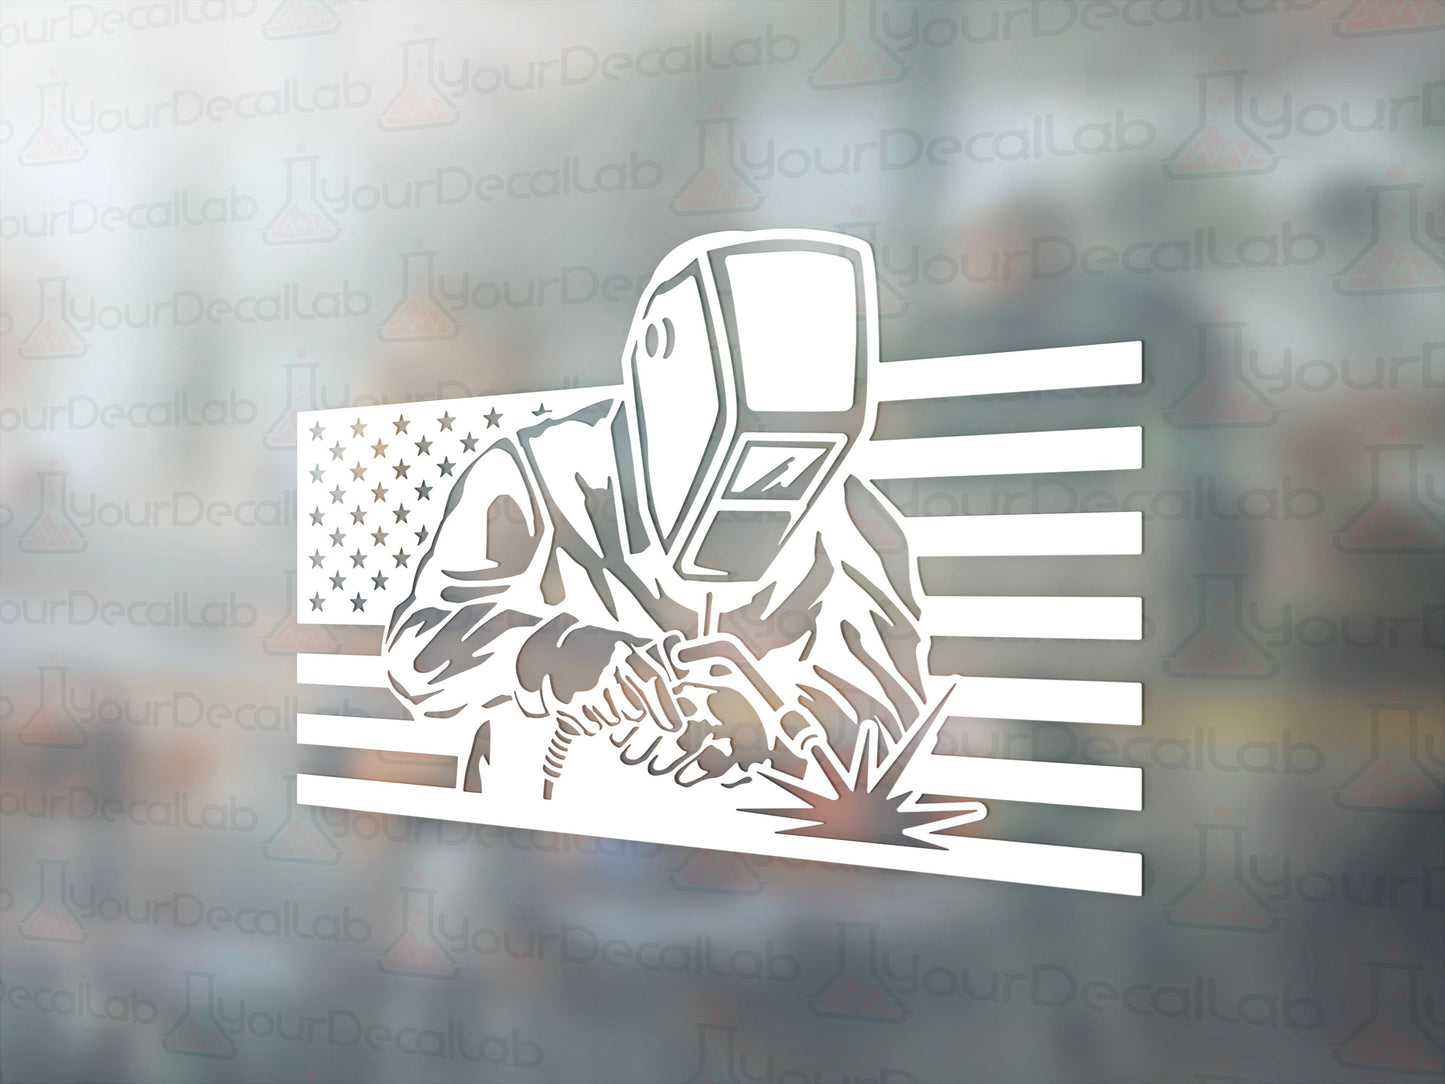 Welder American Flag Decal - Many Colors & Sizes